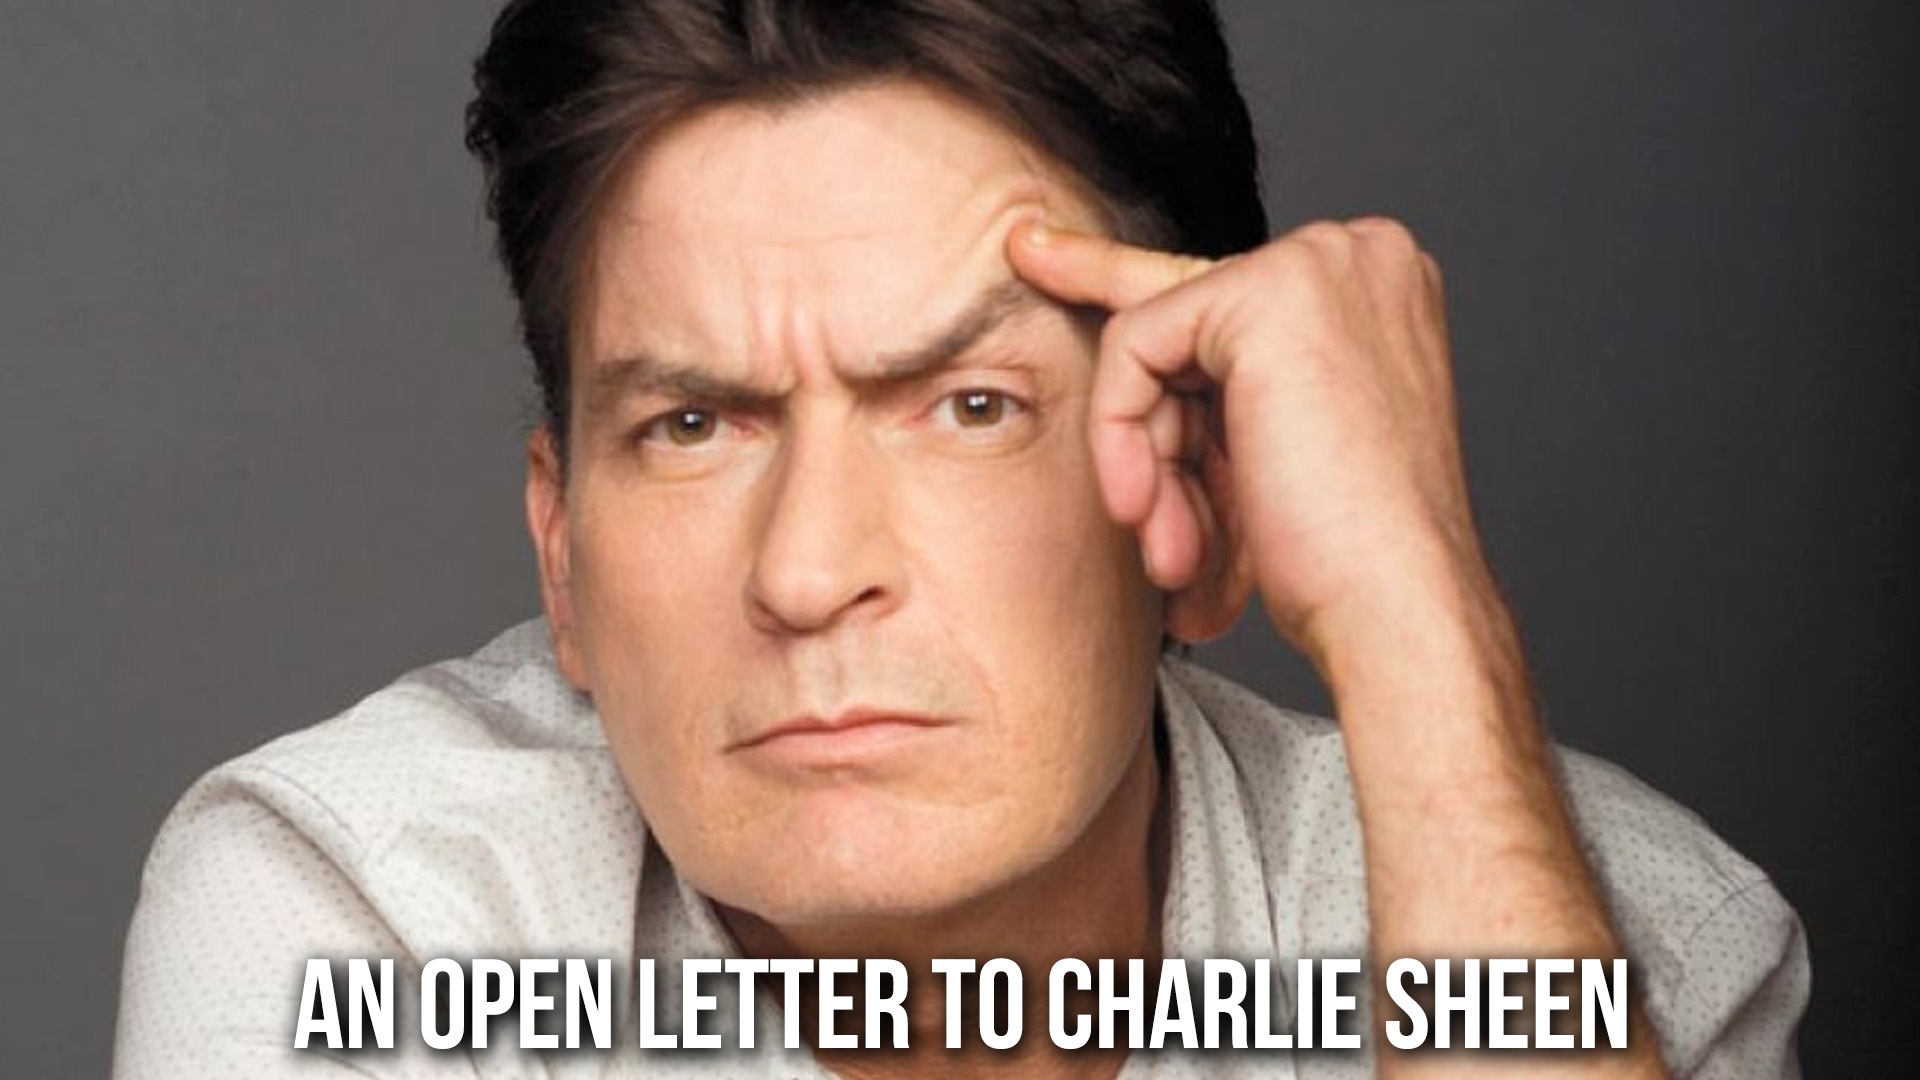 An Open Letter to Charlie Sheen